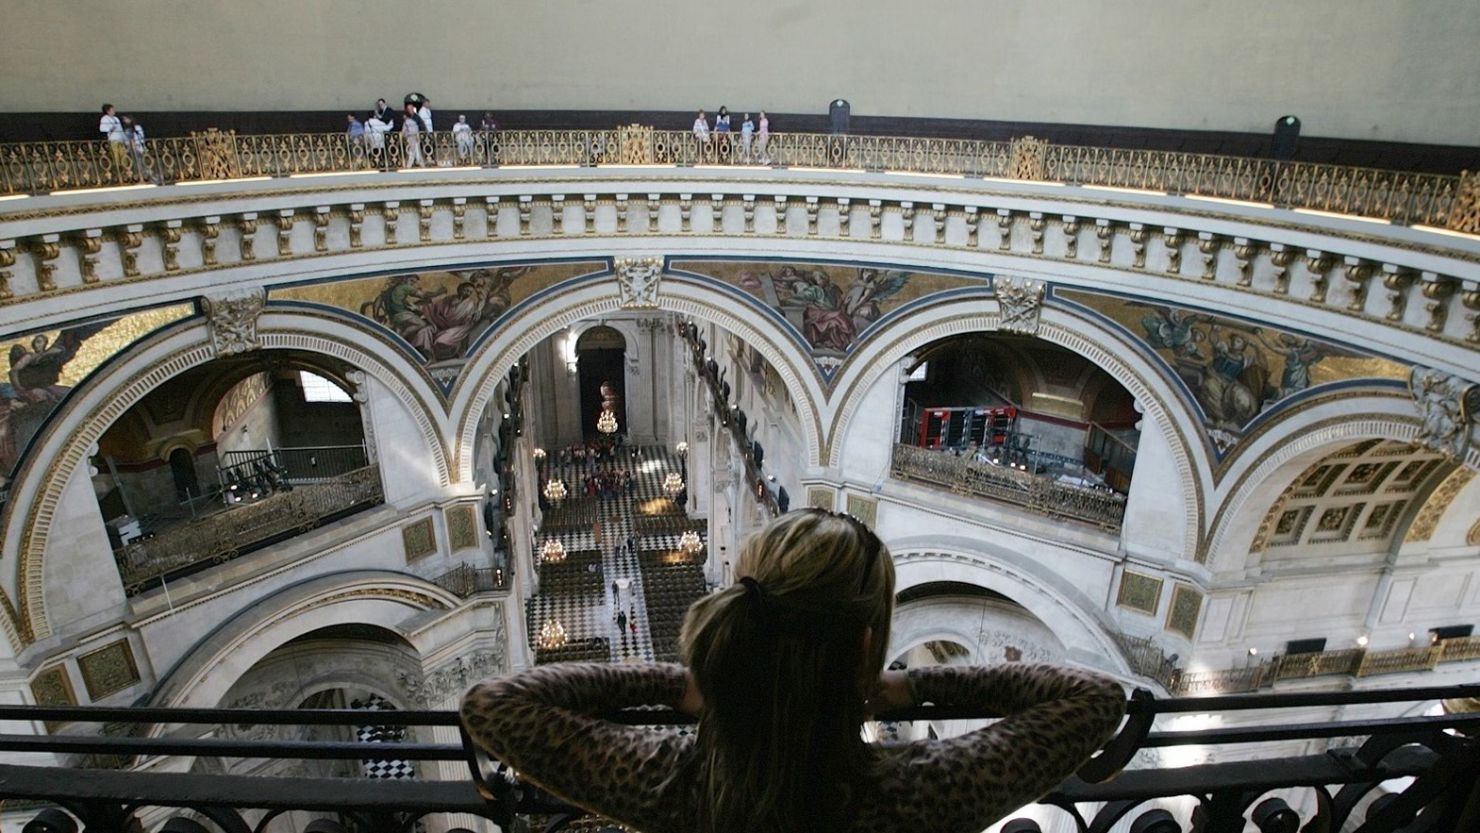 An unidentified visitor looks out from the Whispering Gallery of St. Paul's Cathedral in London.